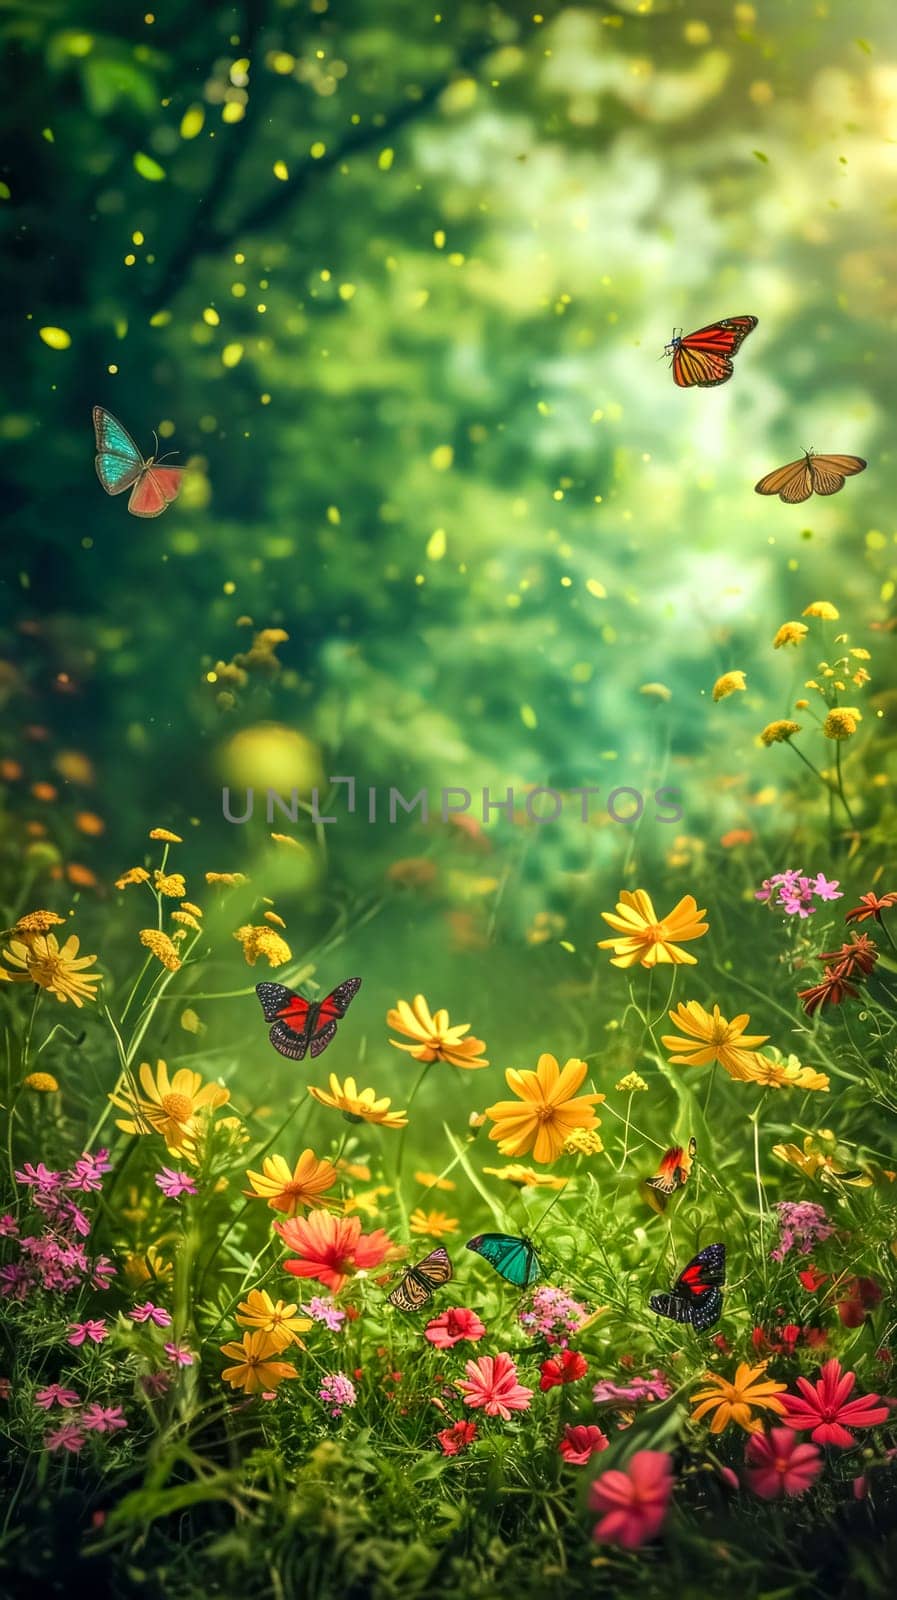 A vibrant springtime image with butterflies fluttering over a field of colorful flowers. vertical